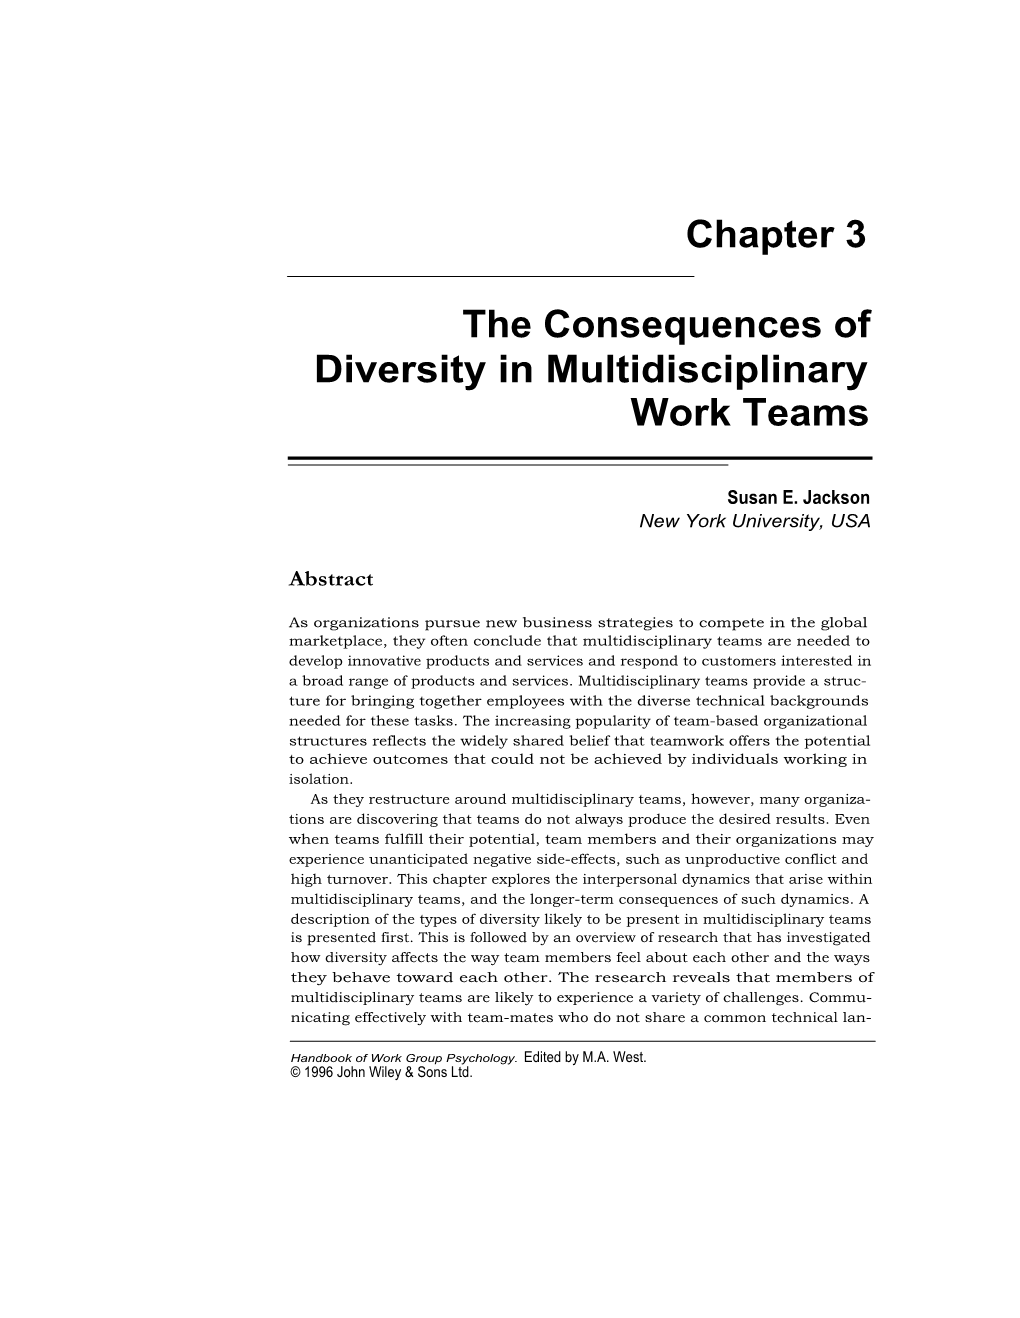 The Consequences of Diversity in Multidisciplinary Work Teams